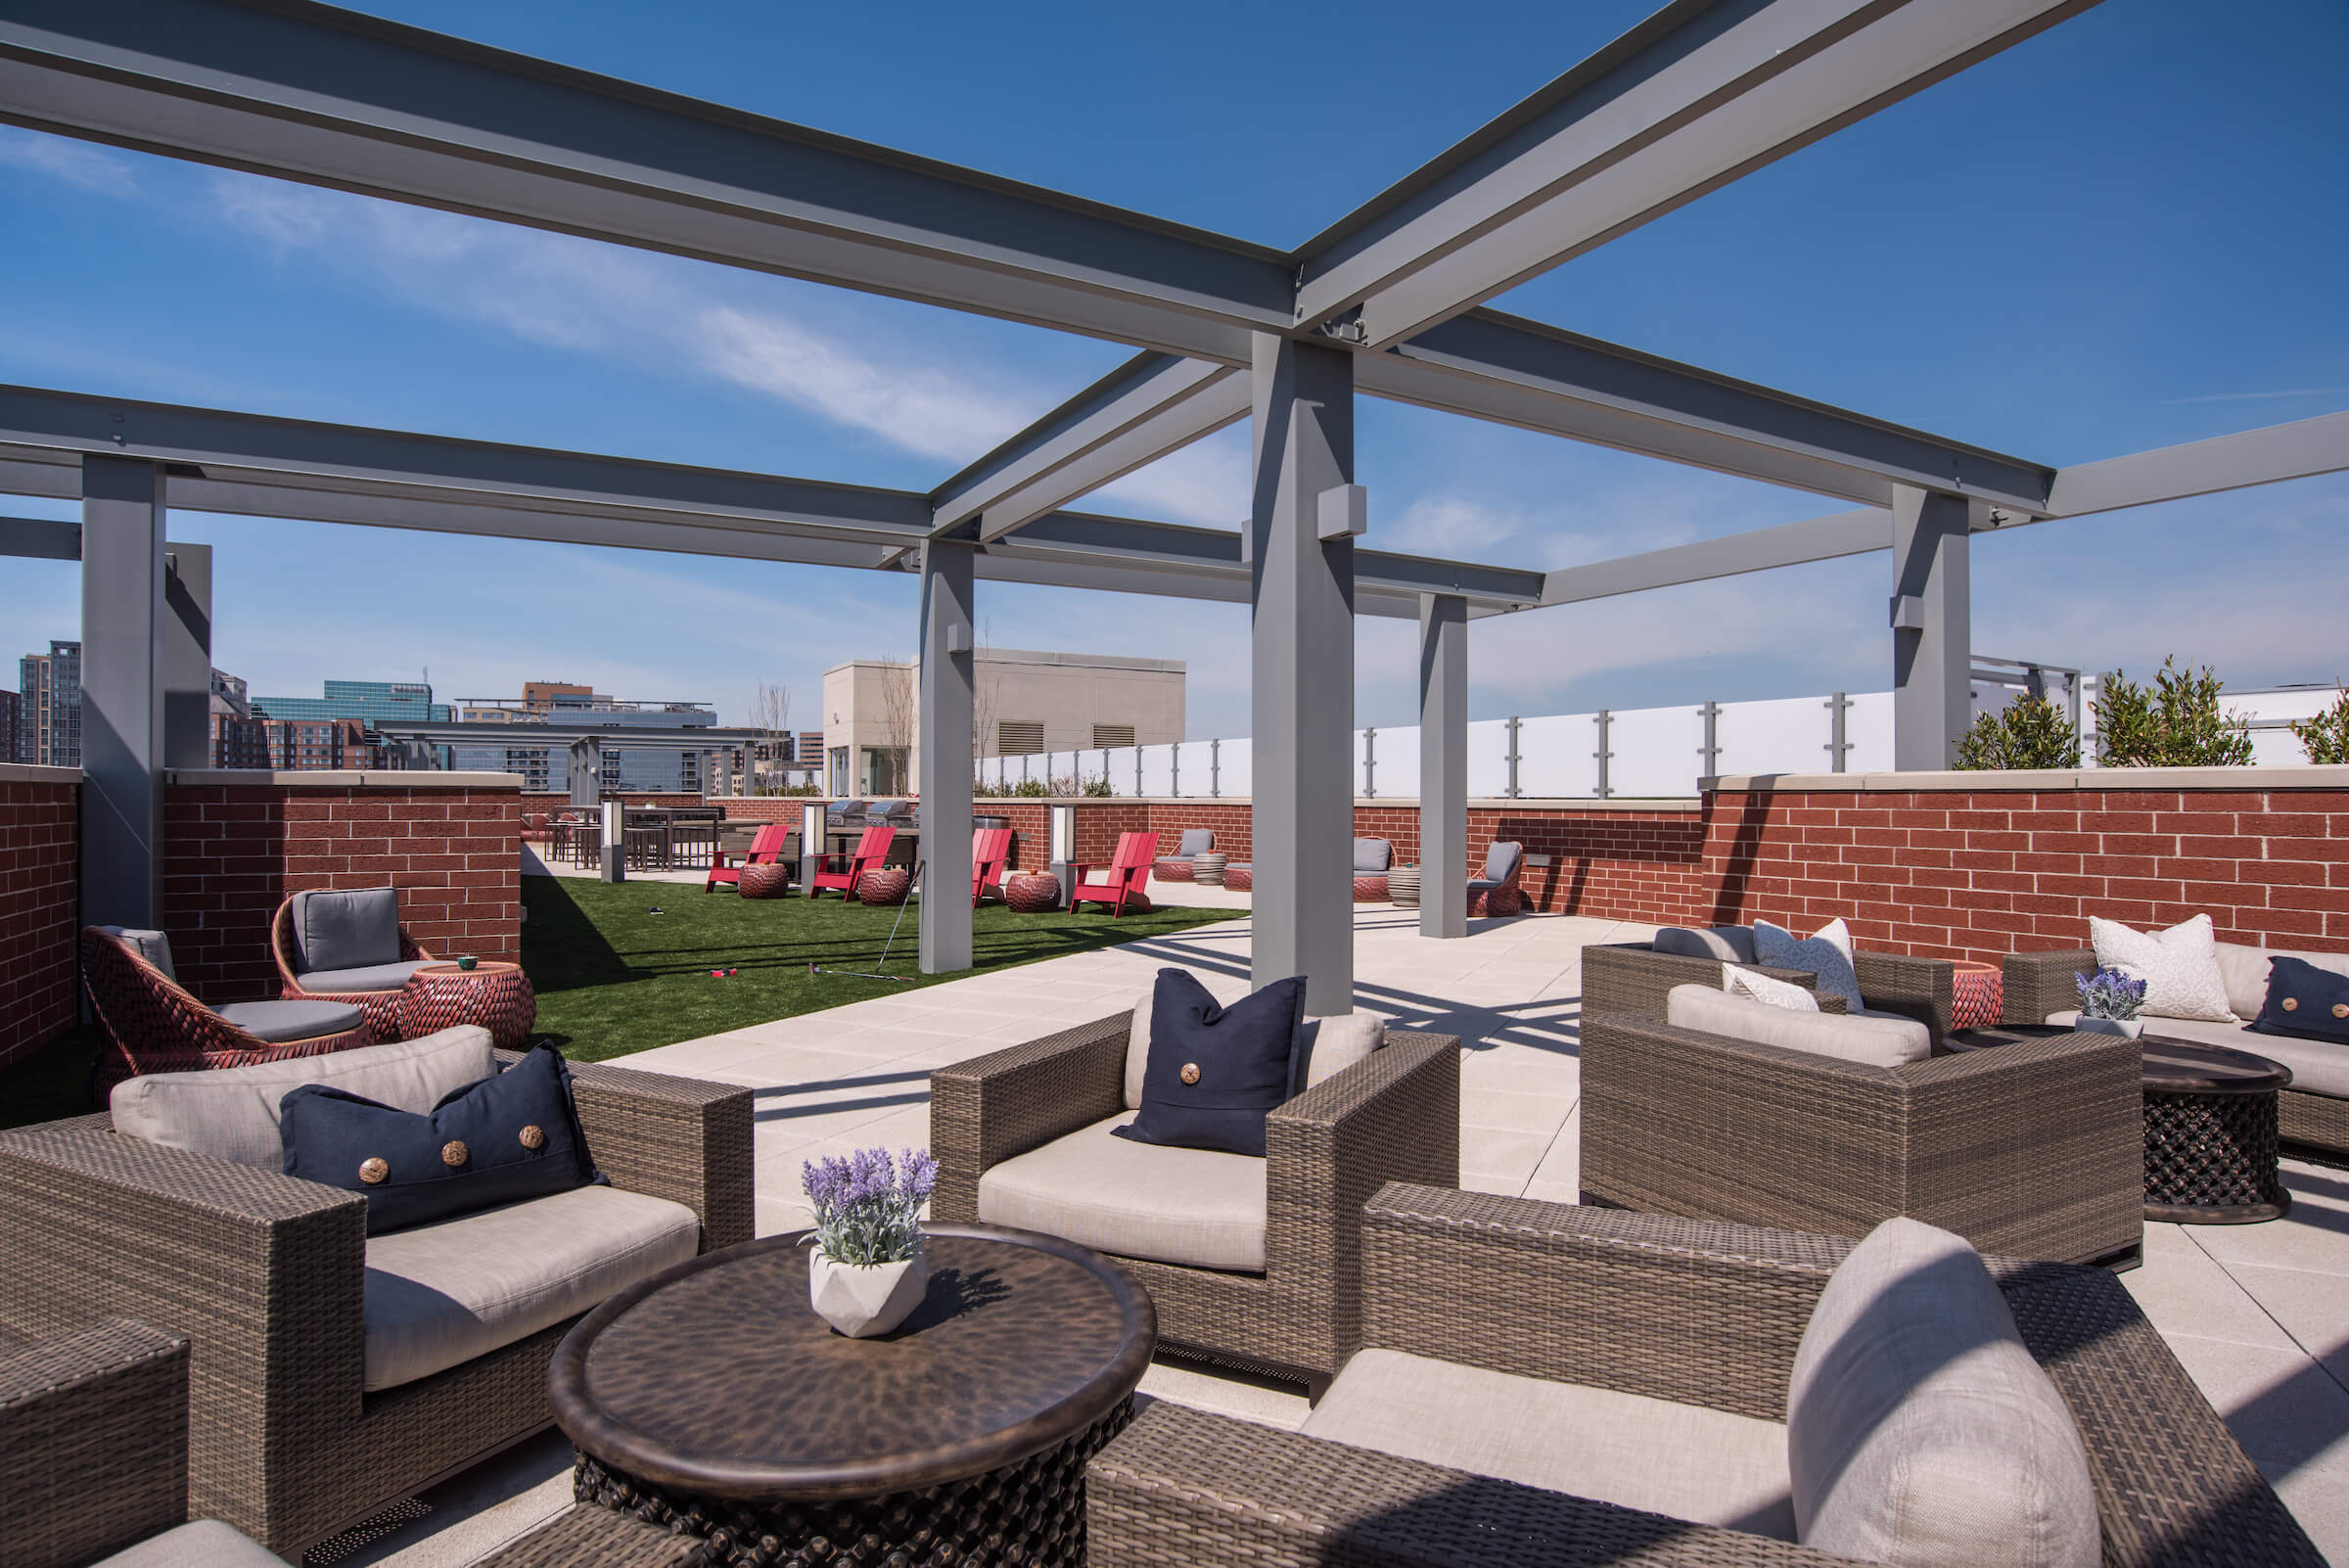 Enjoy happy hour with neighbors in our rooftop lounge.